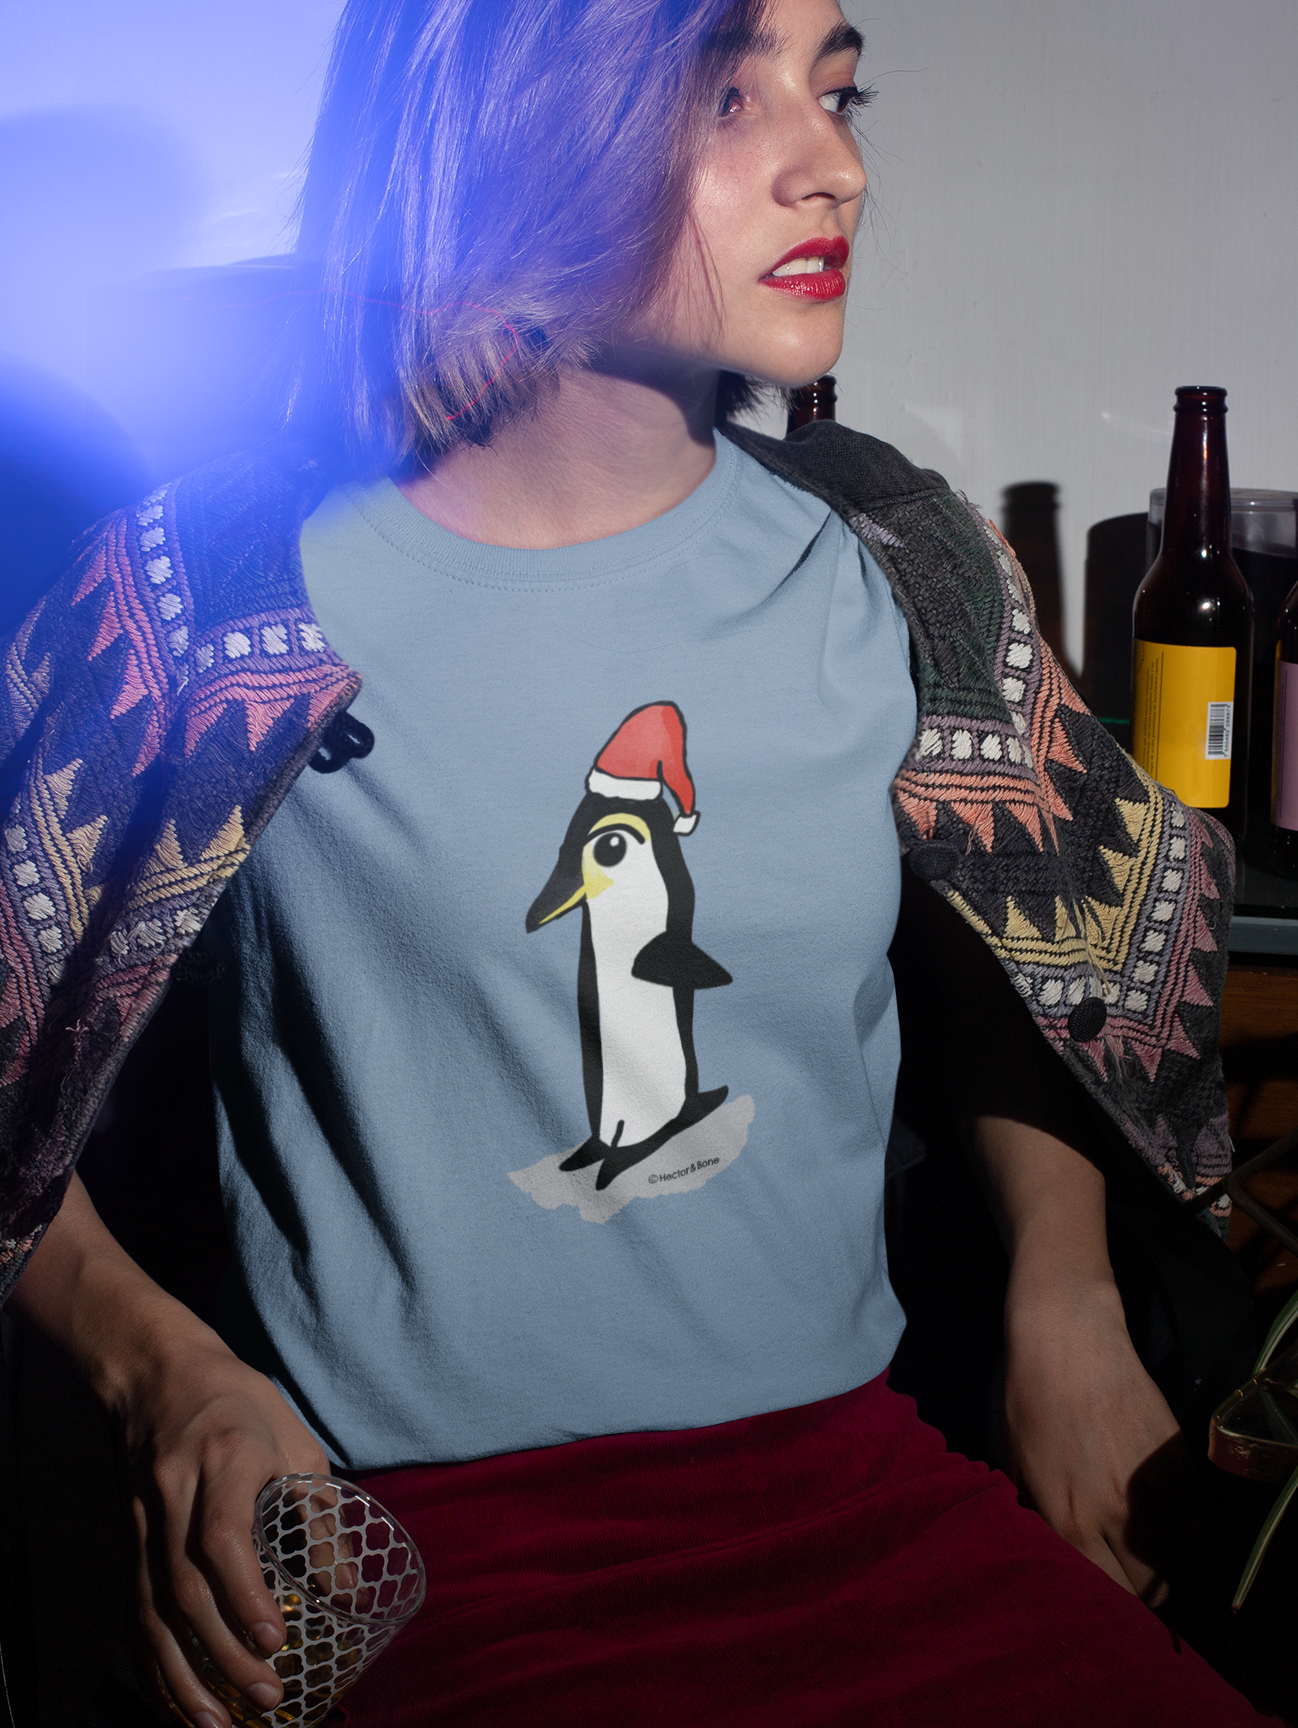 Christmas Penguin T-shirt - Young woman at a Christmas party wearing a Santa Penguin cute Christmas T-shirt in mid heather blue colour illustrated design by Hector and Bone on a Vegan cotton t-shirt